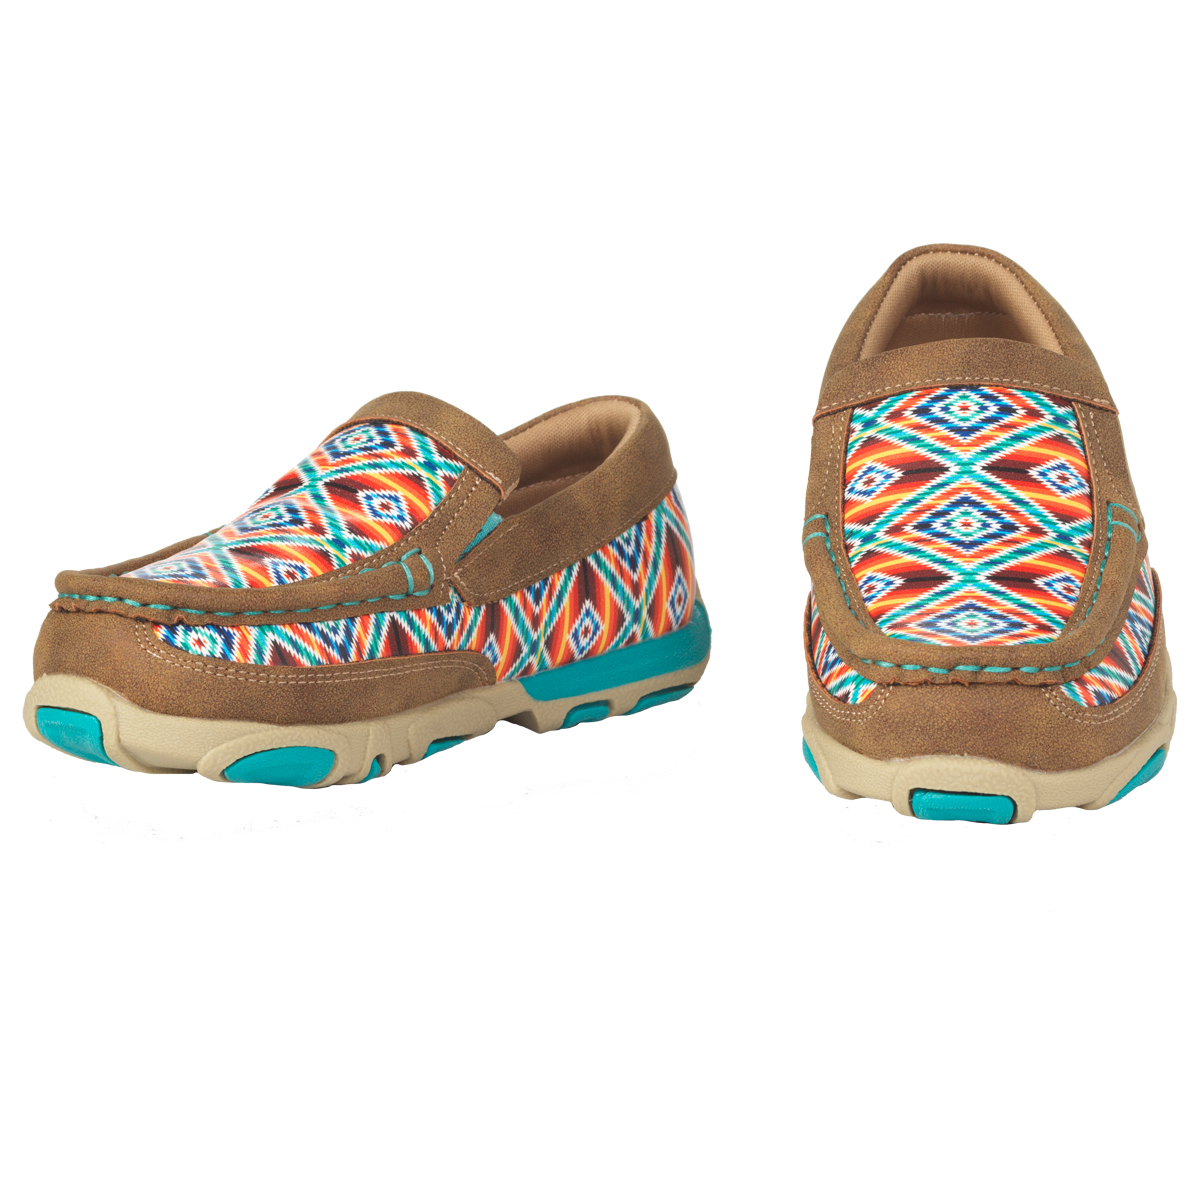 Twister Toddler Brynlee Moccasin Shoes - Brown